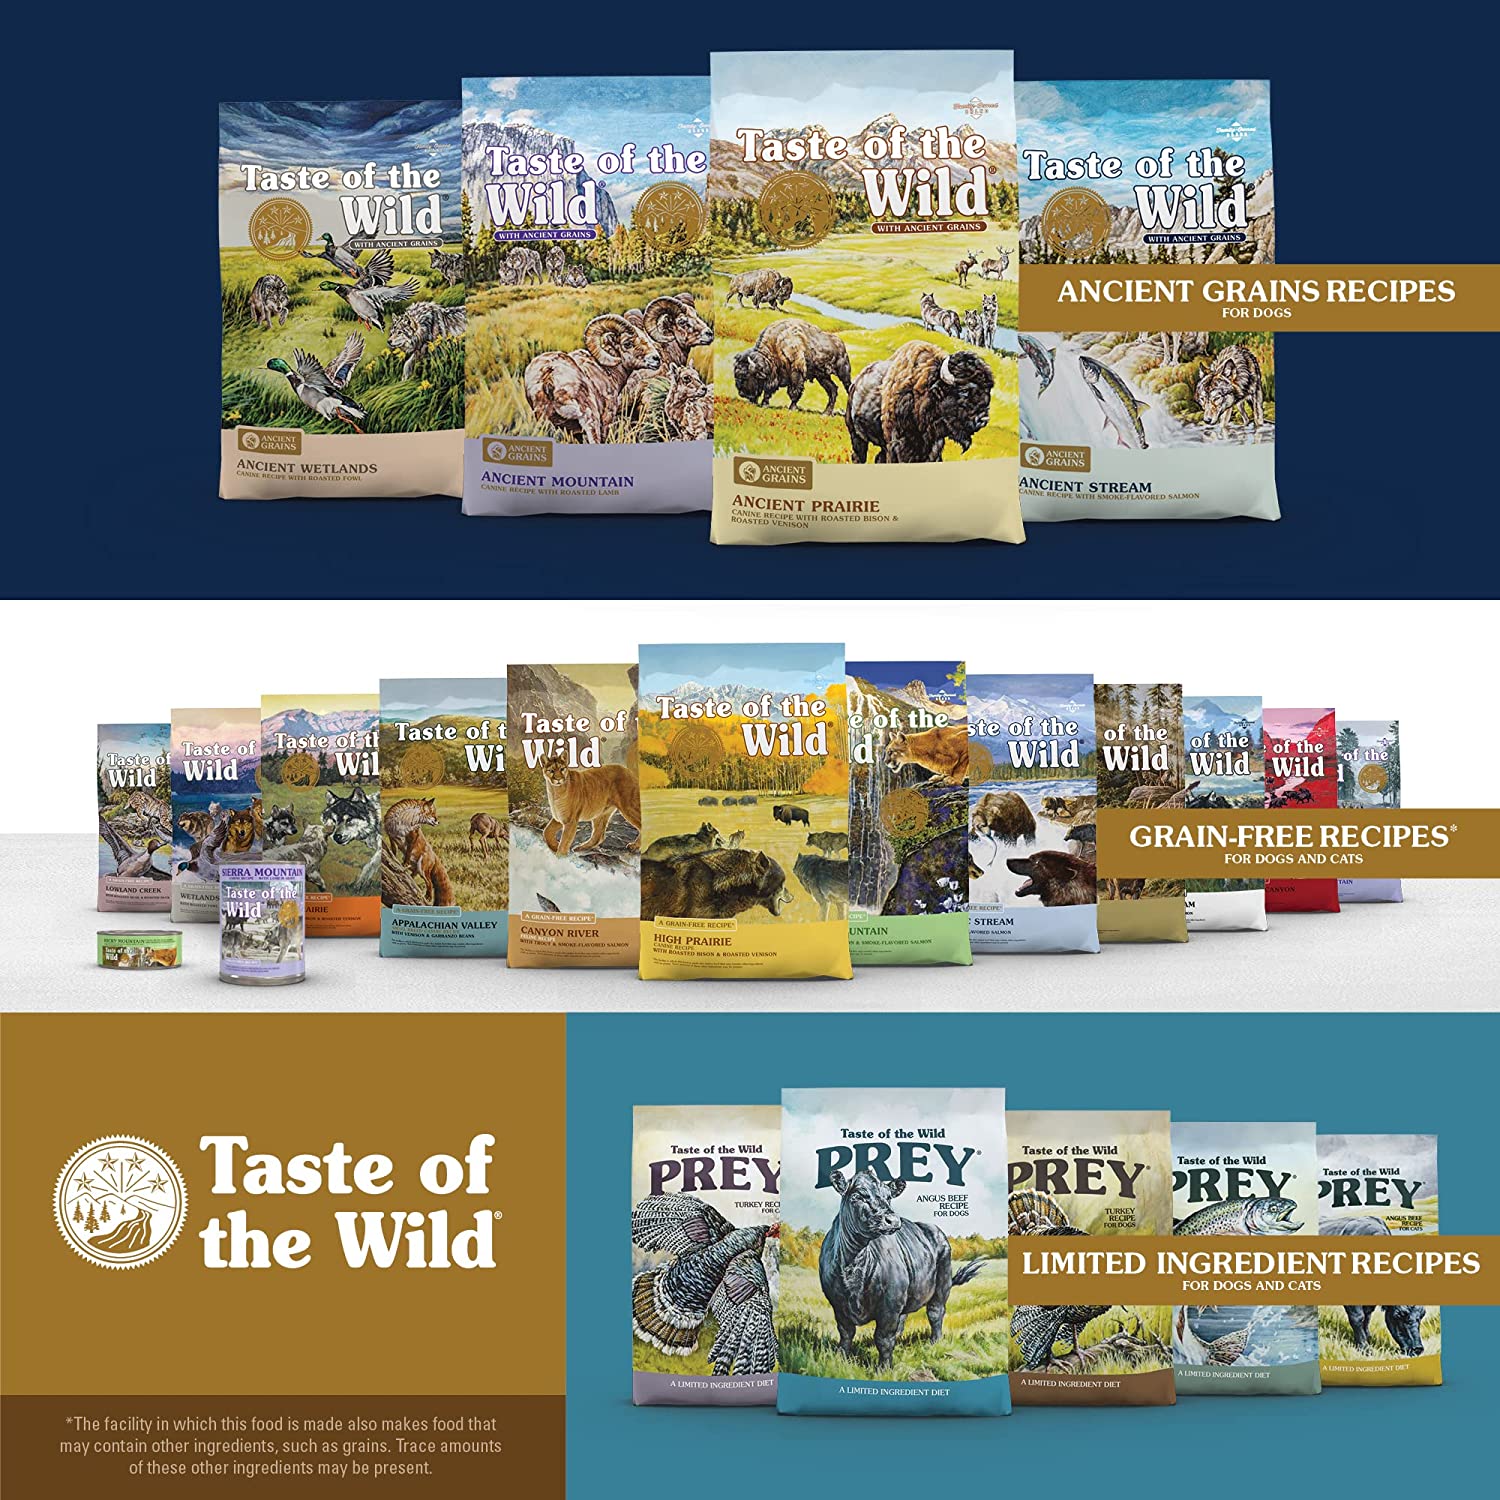 Taste Of The Wild Canyon River Grain-Free Dry Cat Food